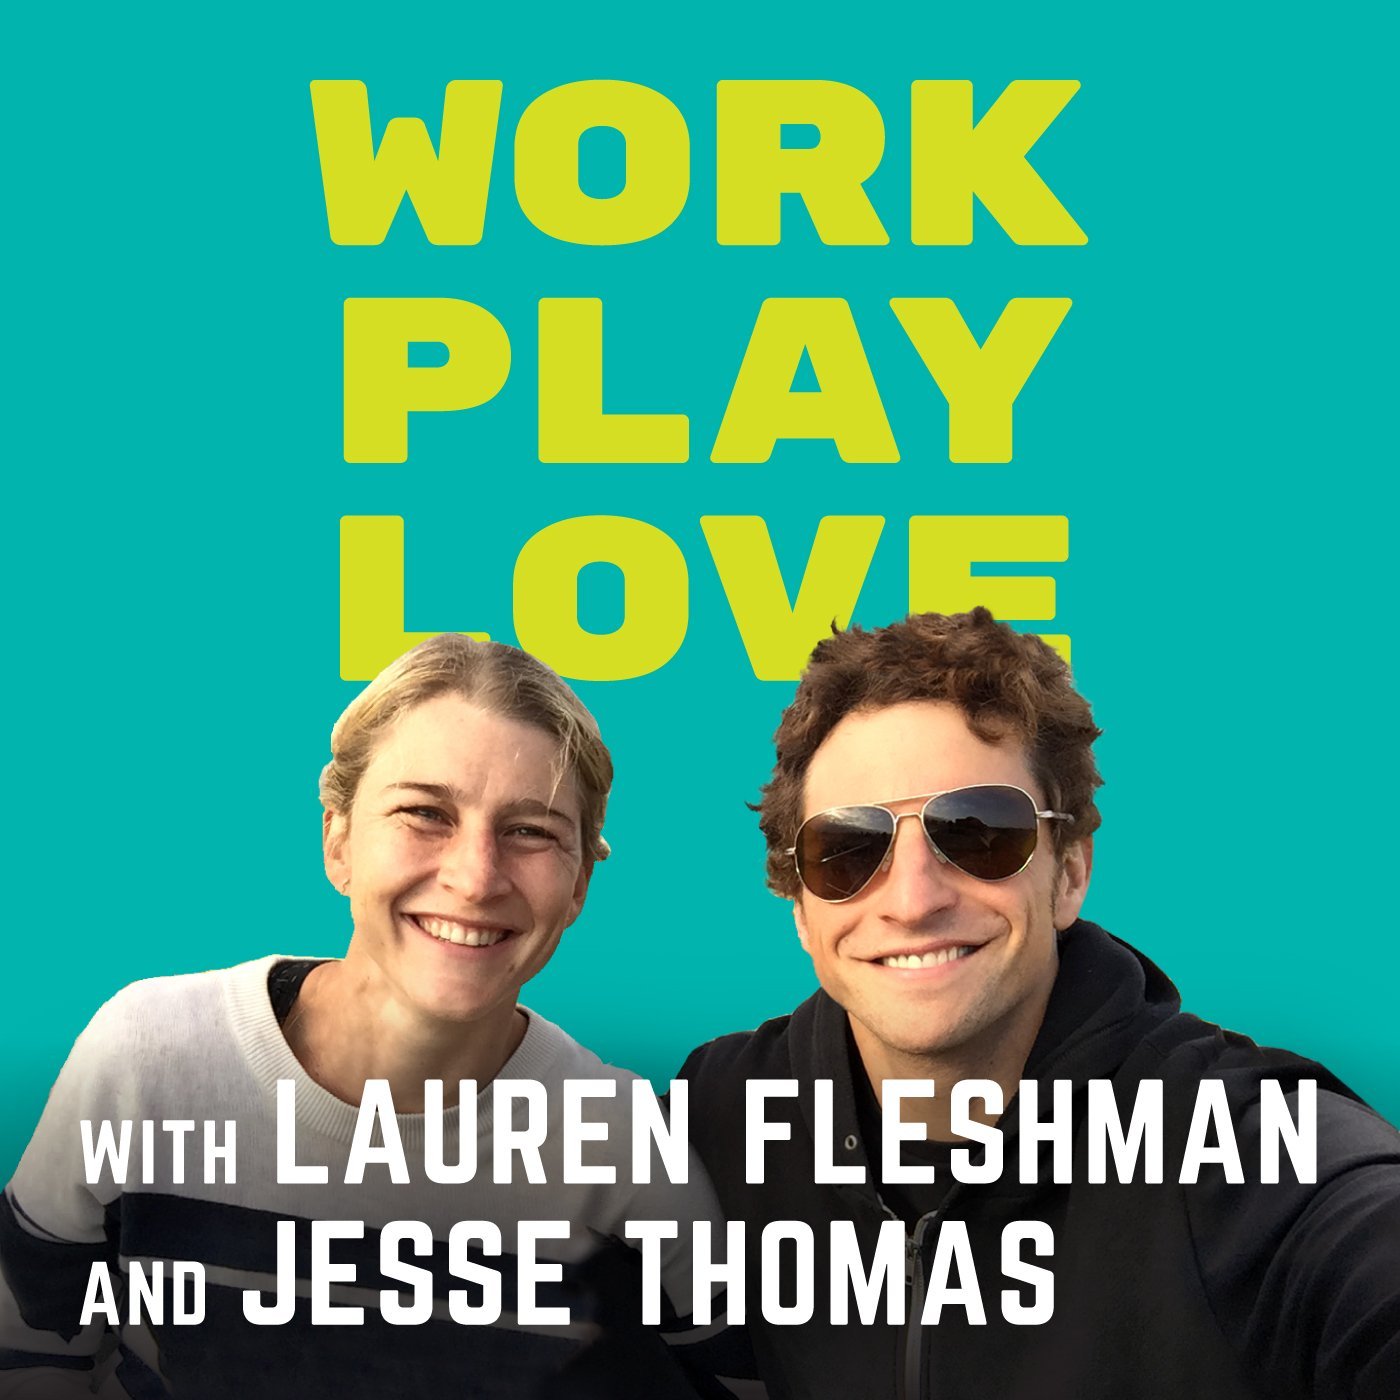 Pro athletes, entrepreneurs, & married w/kids, @laurenfleshman & @jessemthomas answer your questions about balancing work, sport, and relationships!